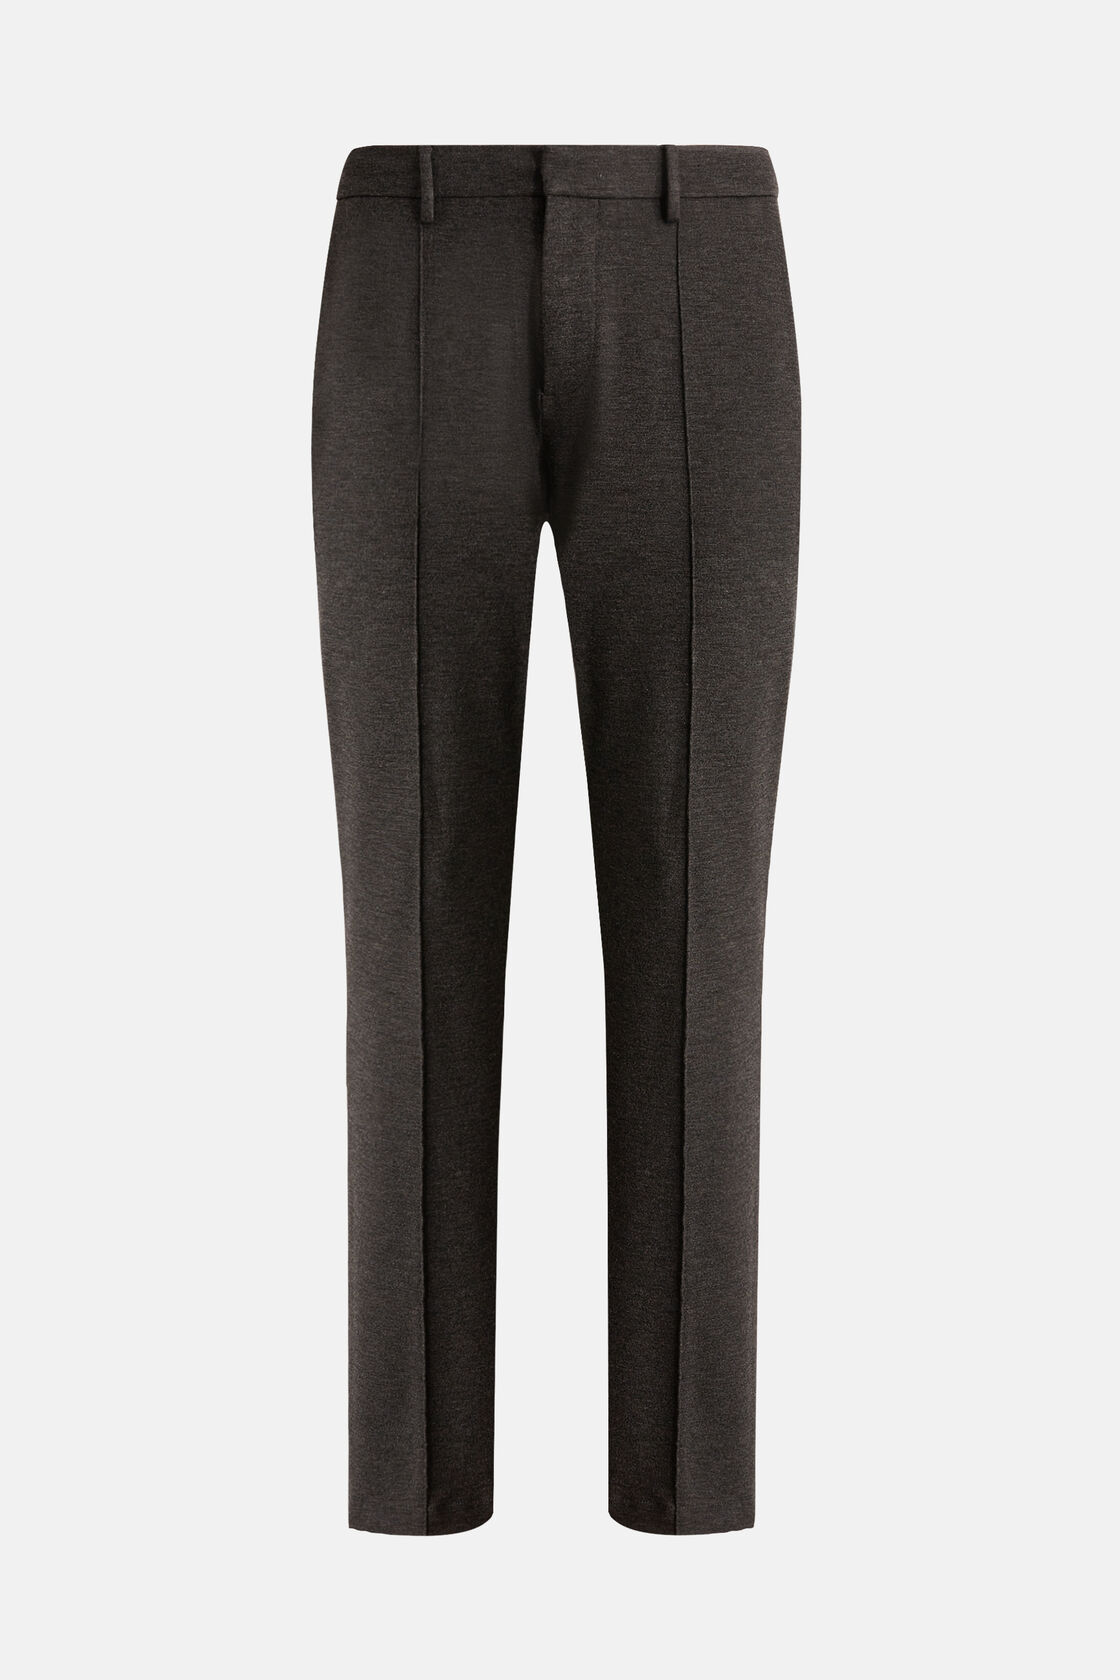 Trousers in a Stretch Viscose and Nylon blend, Charcoal, hi-res